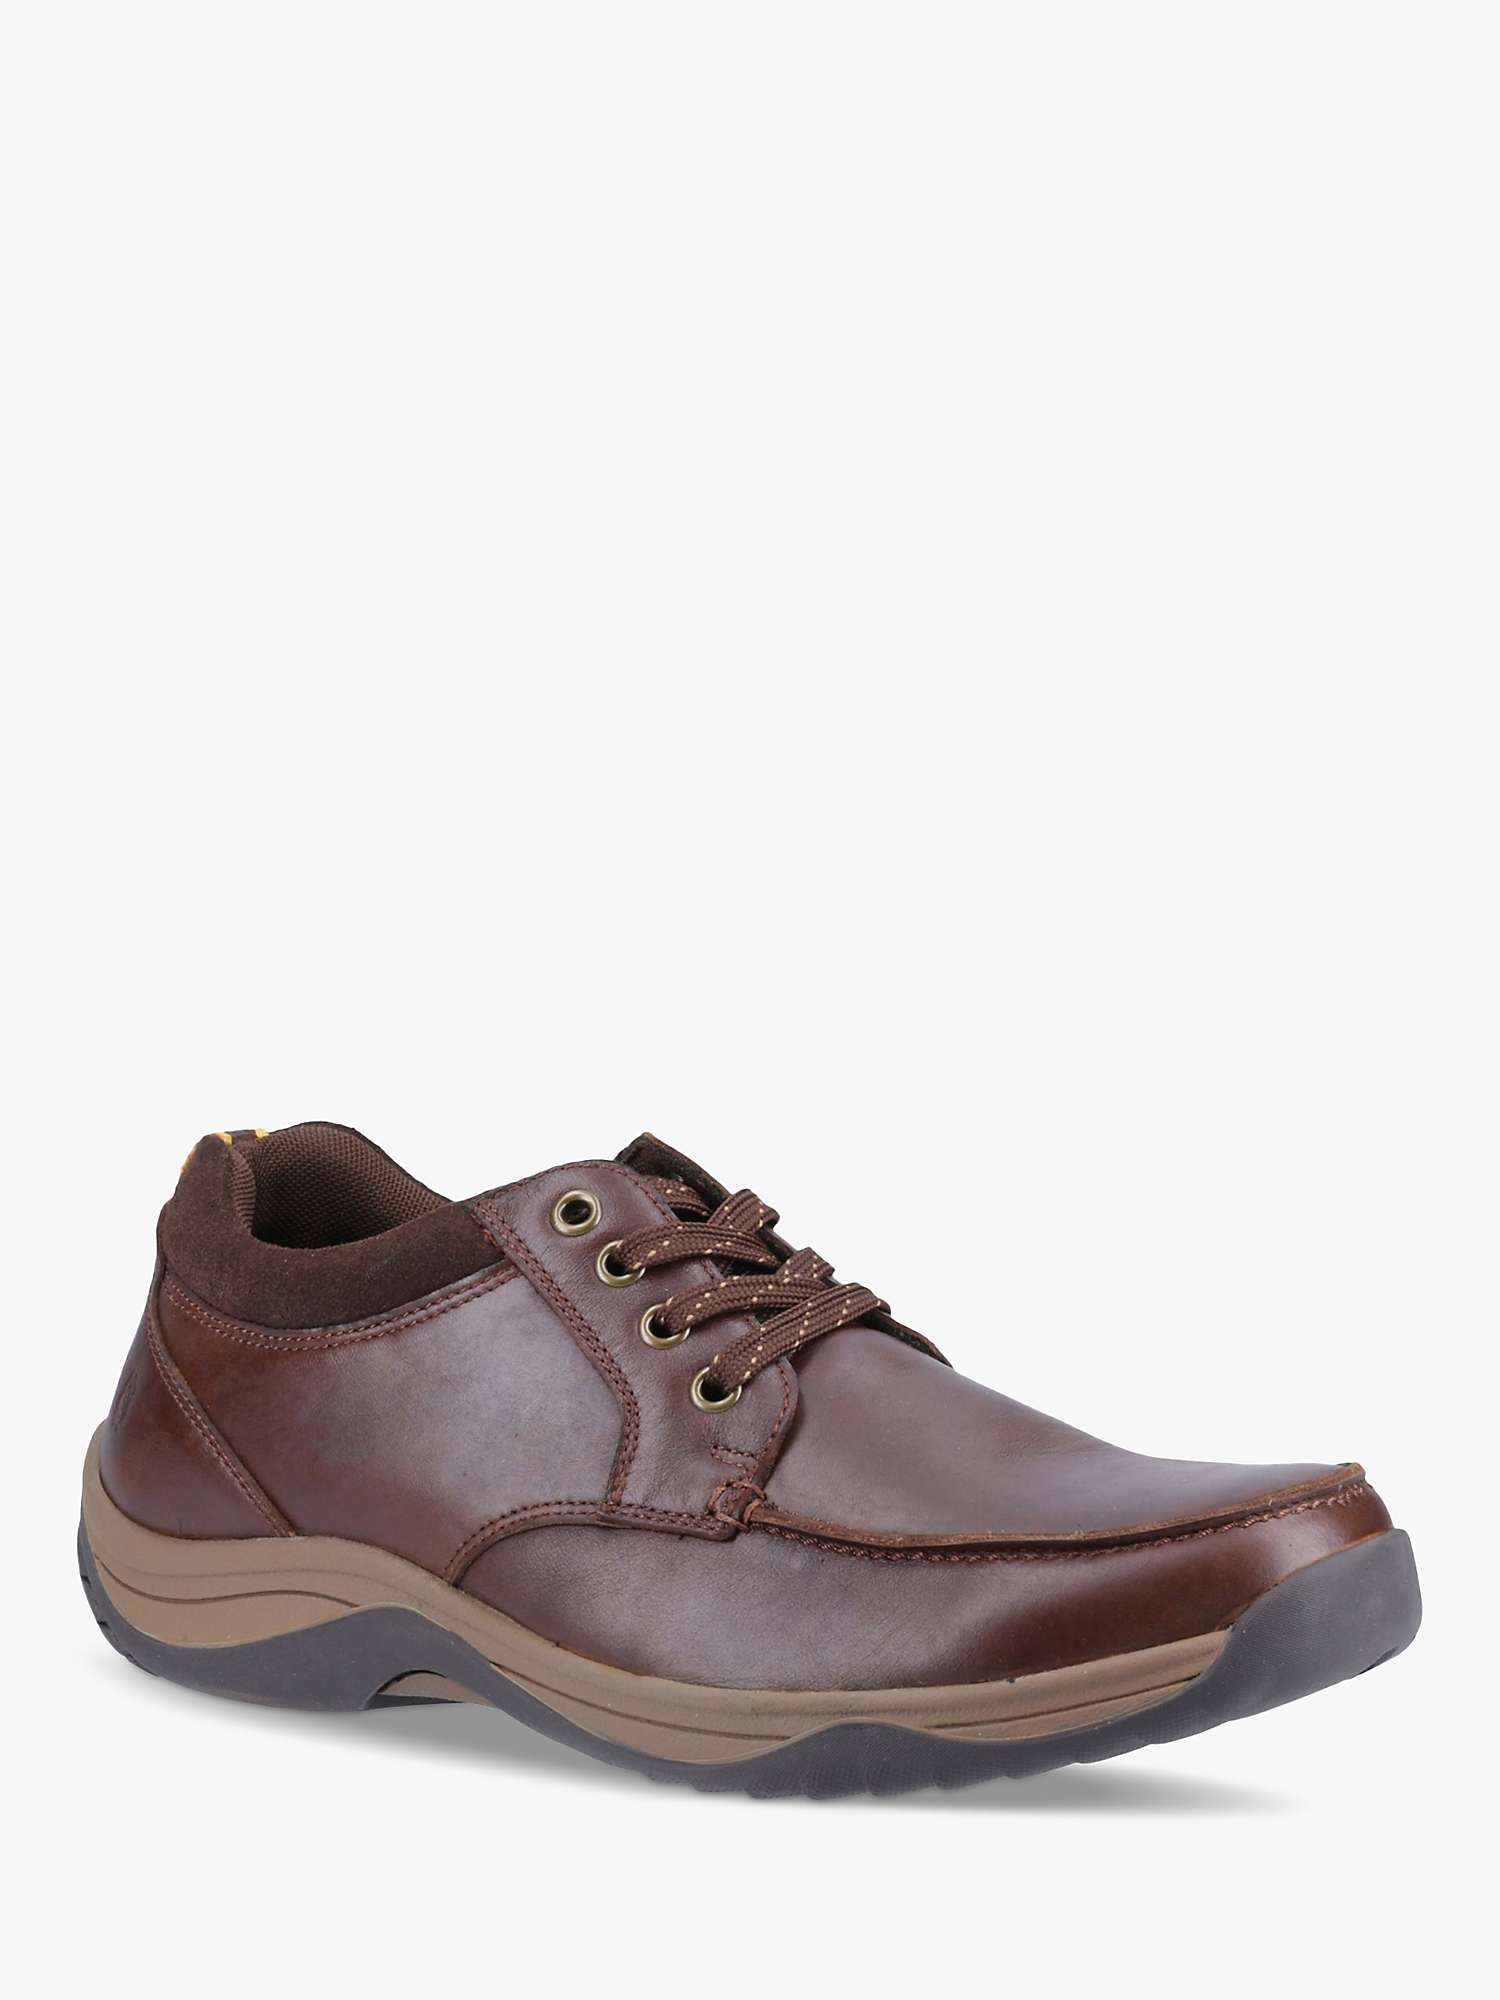 Buy Hush Puppies Derek Leather Lace Up Shoes Online at johnlewis.com